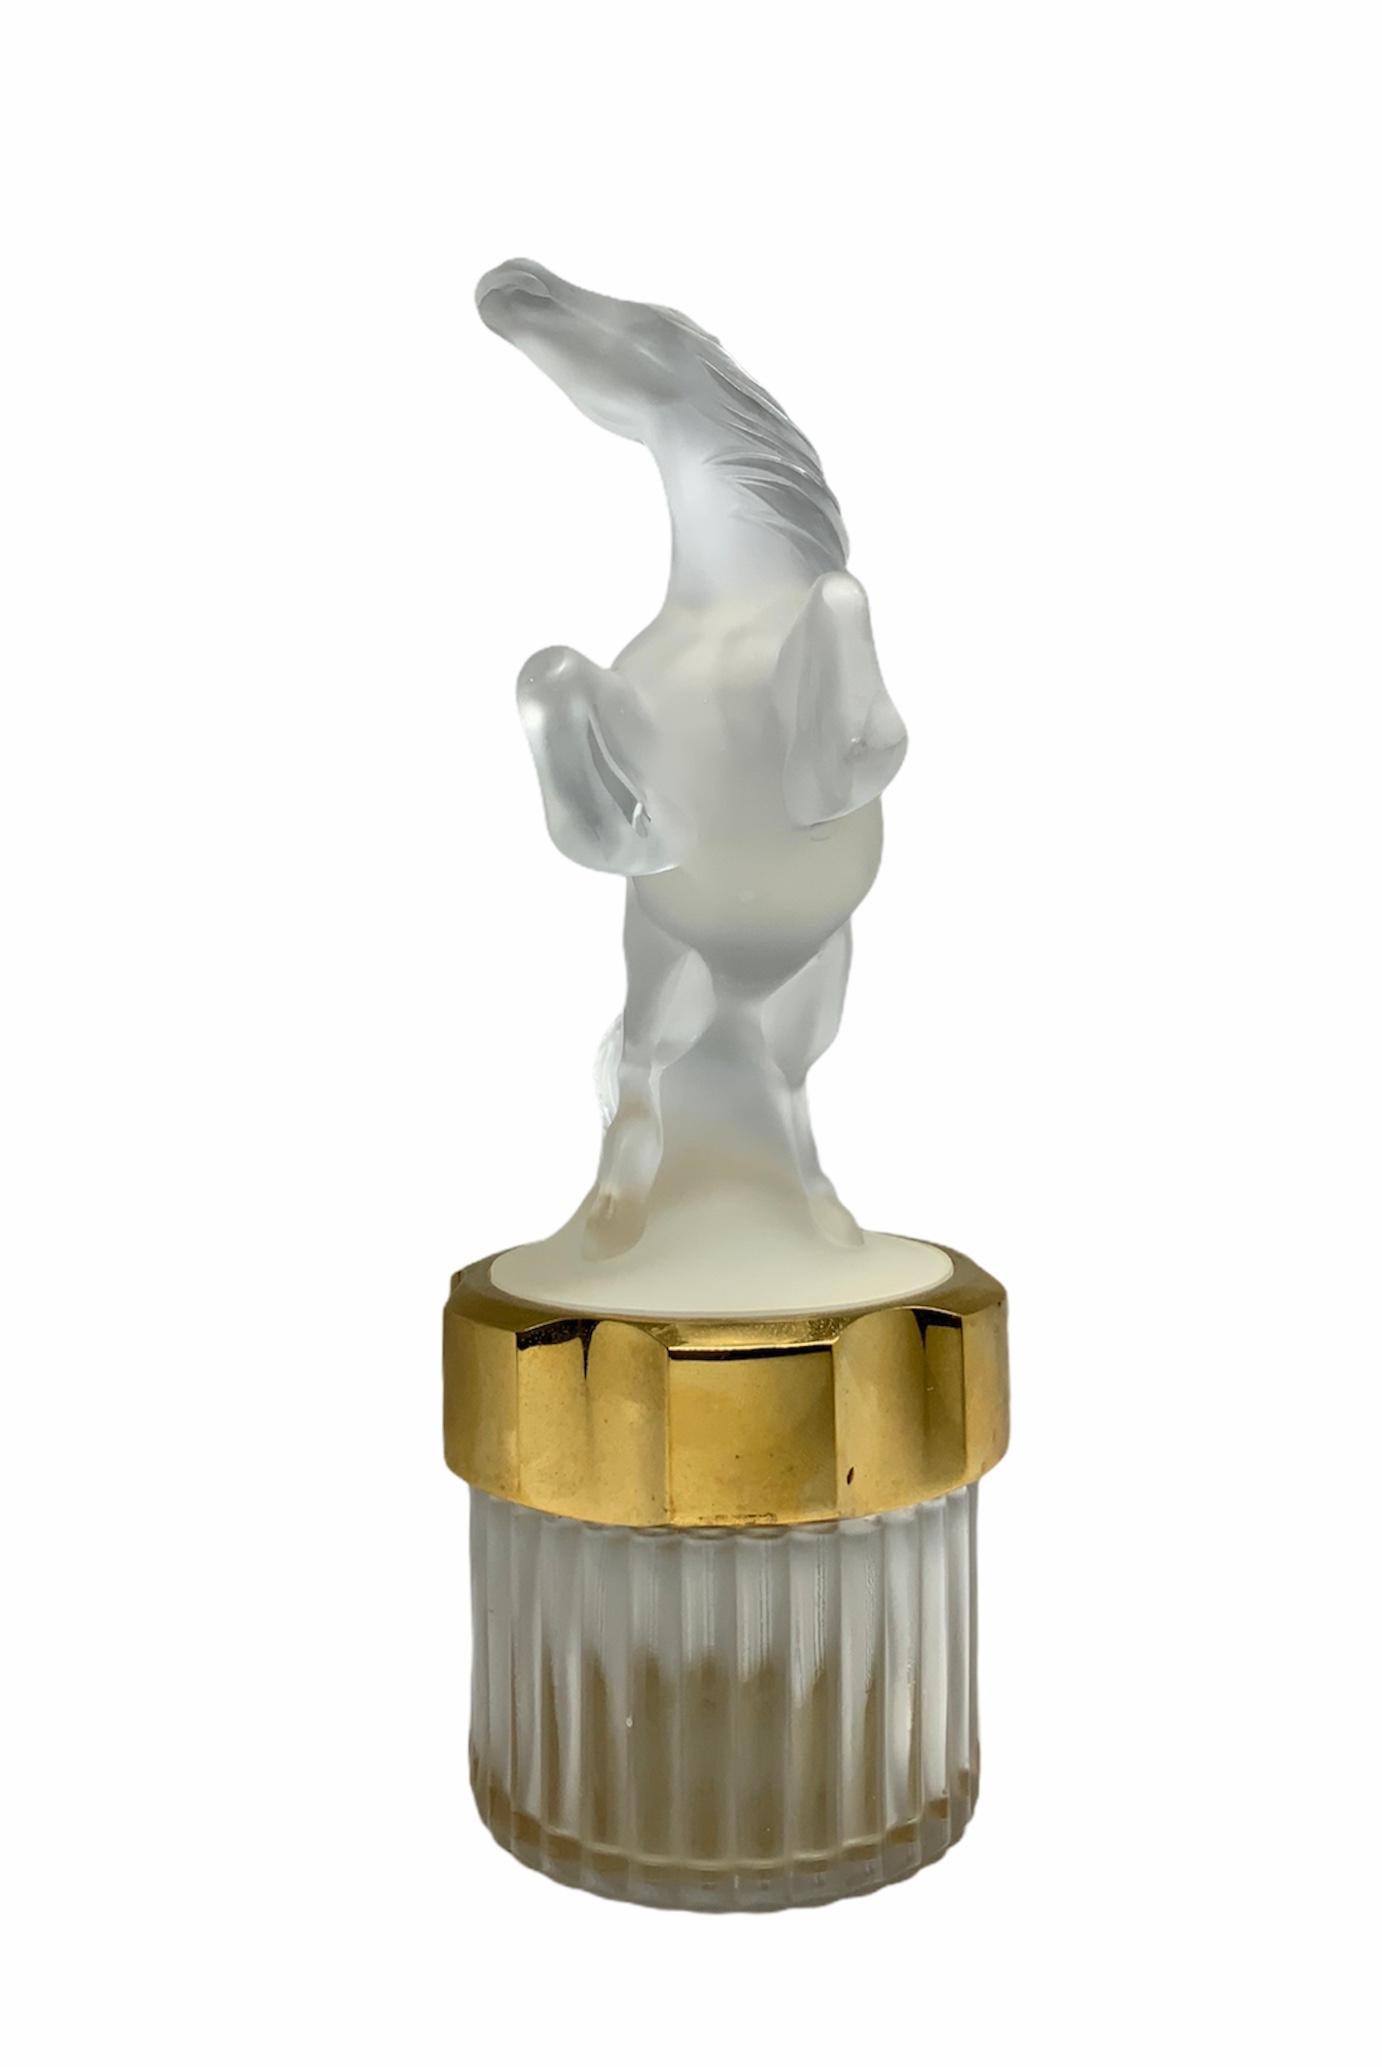 This is a Lalique Crystal Flacon Collection “Mascotte Equus” men perfume bottle. It features a frosted crystal horse standing on his hind legs over a round crystal base surrounded by a gold tone plastic round lid. The clear crystal bottle is ribbed